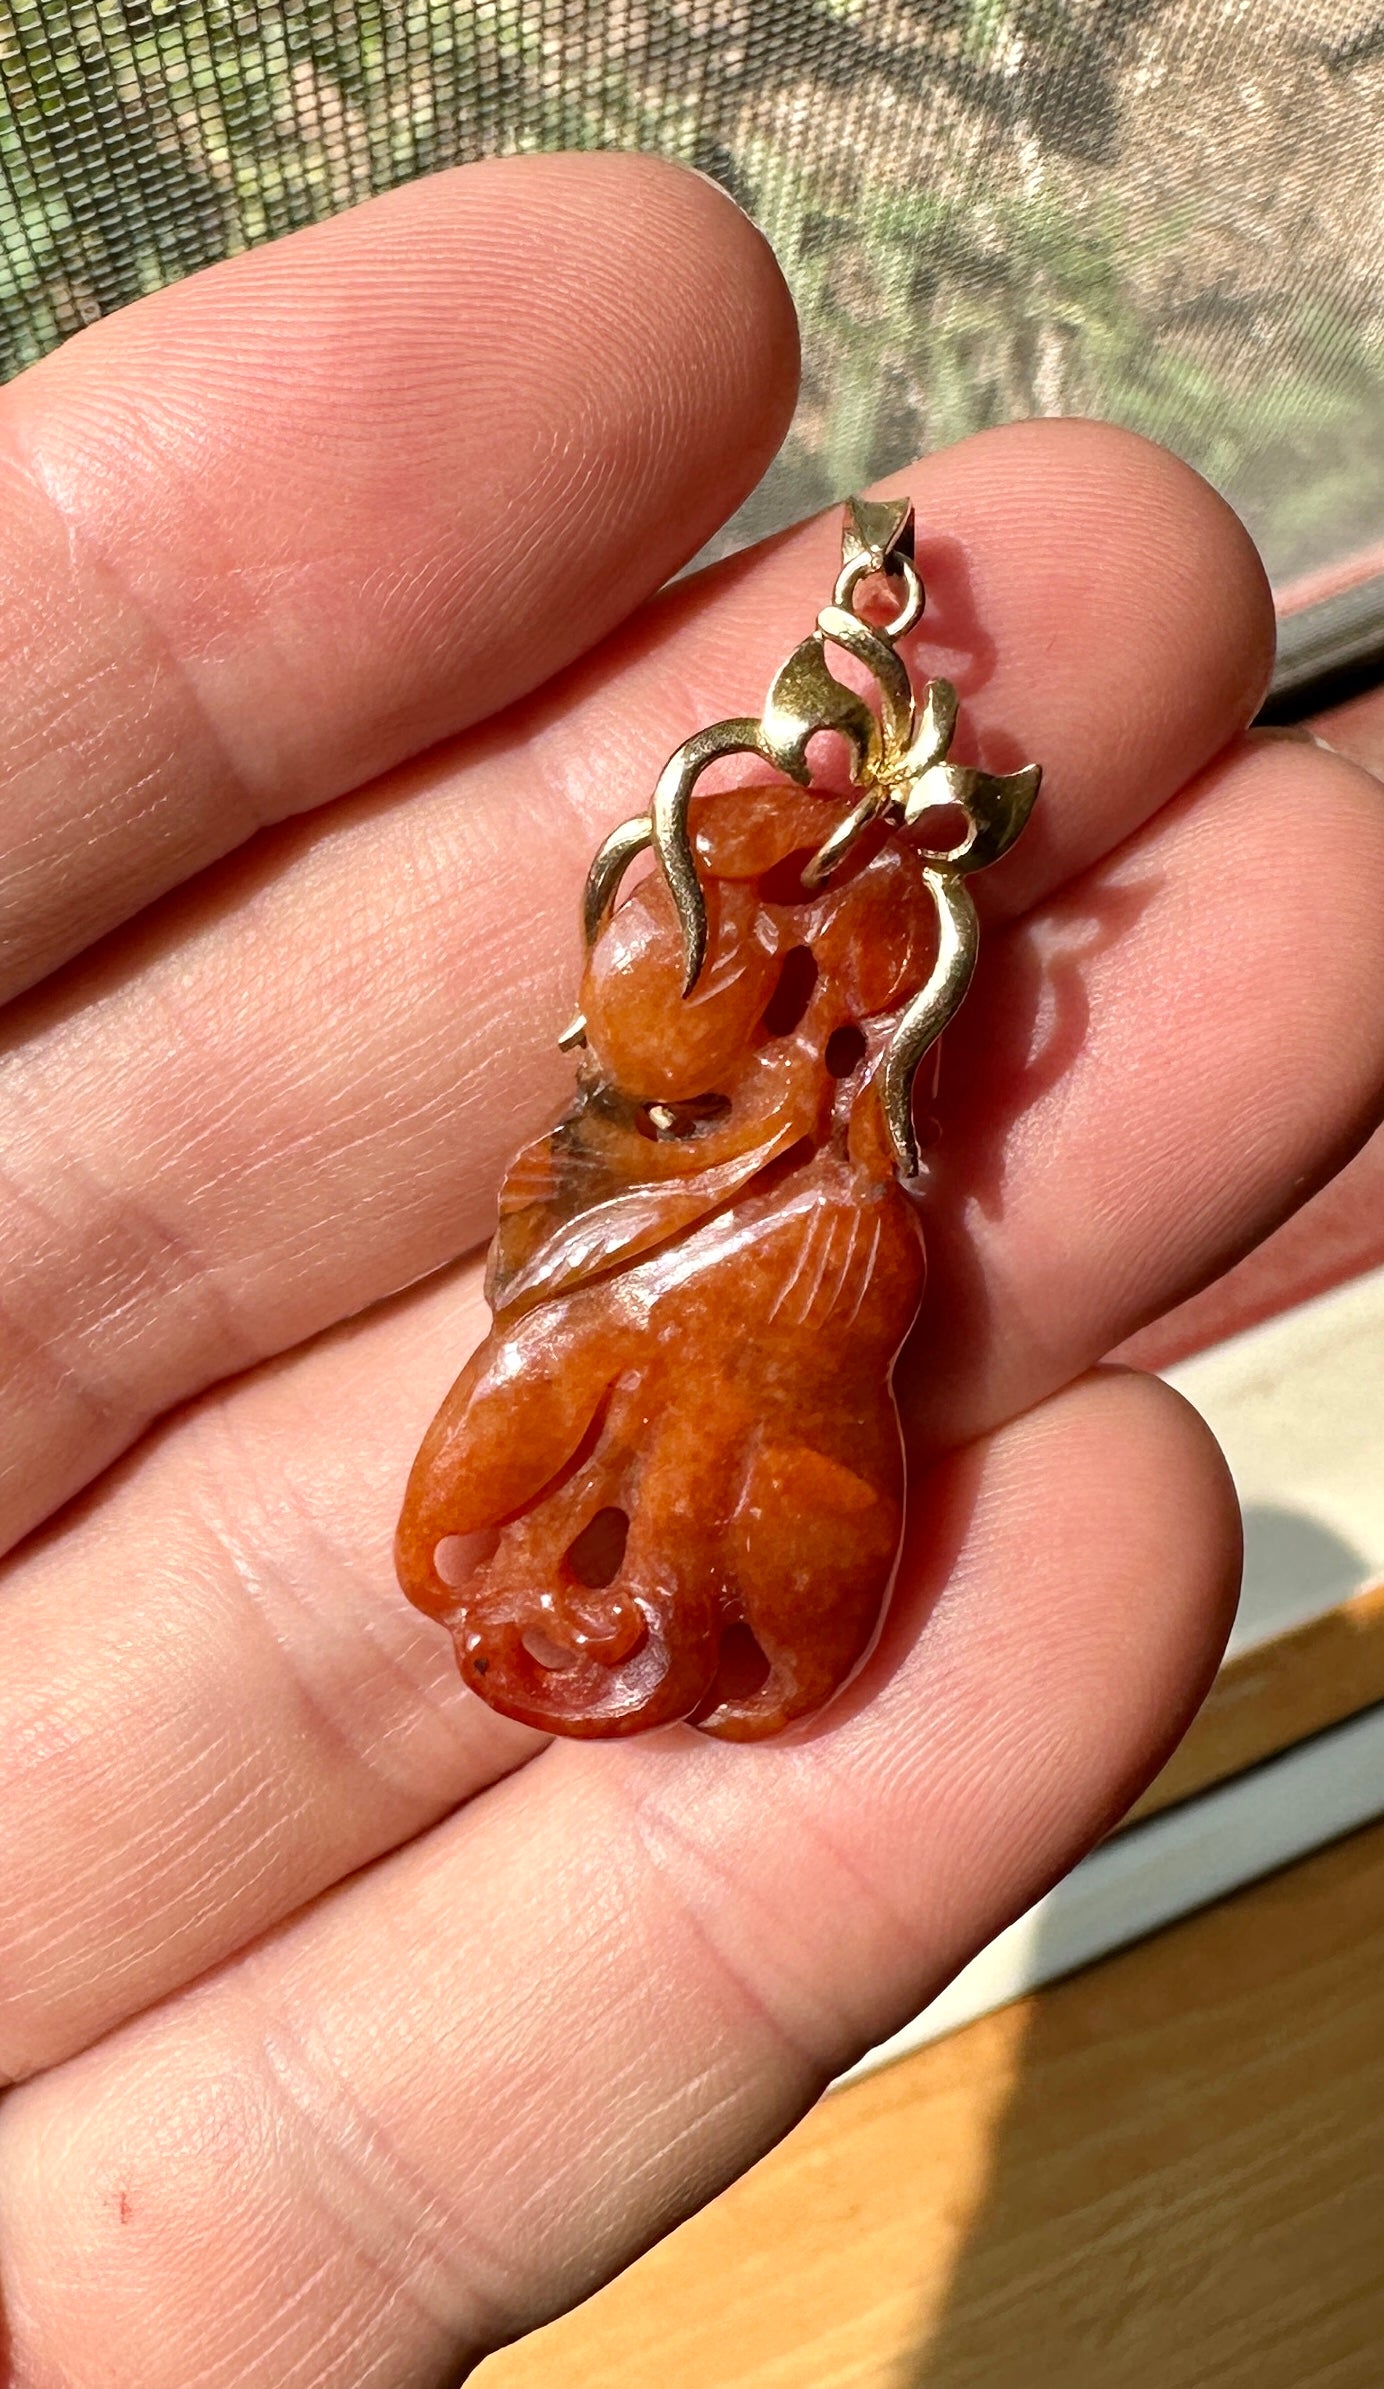 THIS IS A VERY RARE RED JADE FLOWER PENDANT.  THE MAGNIFICENT RED JADE IS BEAUTIFULLY CARVED IN A HANGING FLOWER MOTIF AND IS SET IN AN ELEGANT SCROLLING SURMOUNT IN 14 KARAT YELLOW GOLD.
The meaning behind the jade flower and leaf carving is that